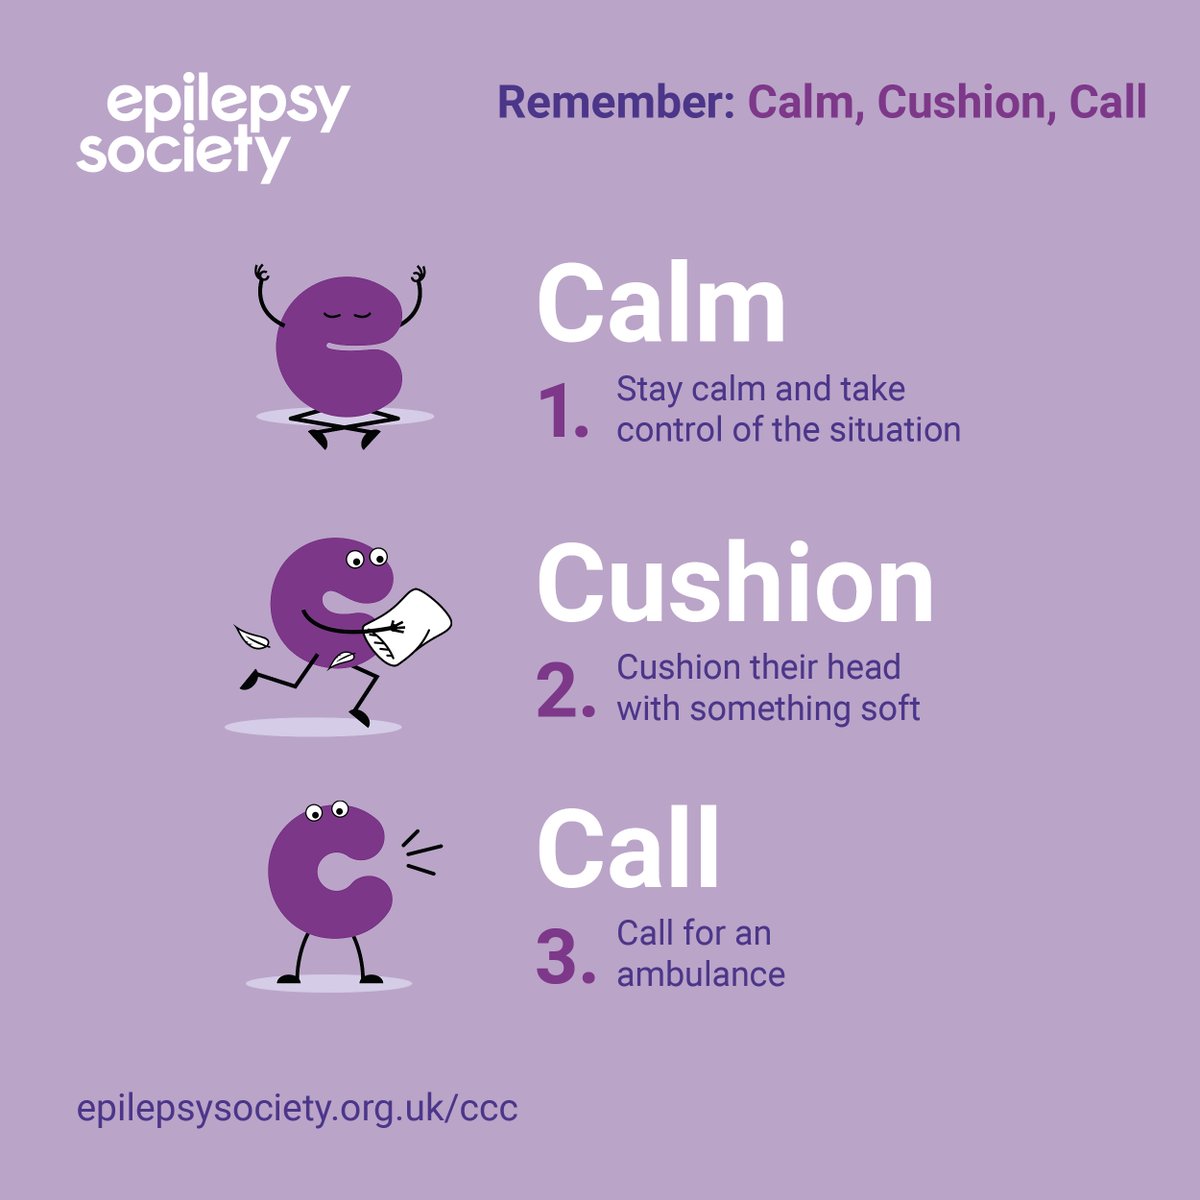 Today is #PurpleDay and we want to show support for this year’s theme of #StampOutSeizures. Today is an opportunity to raise awareness for the 630,000 people in the UK that have epilepsy. For more epilepsy info follow @epilepsysociety